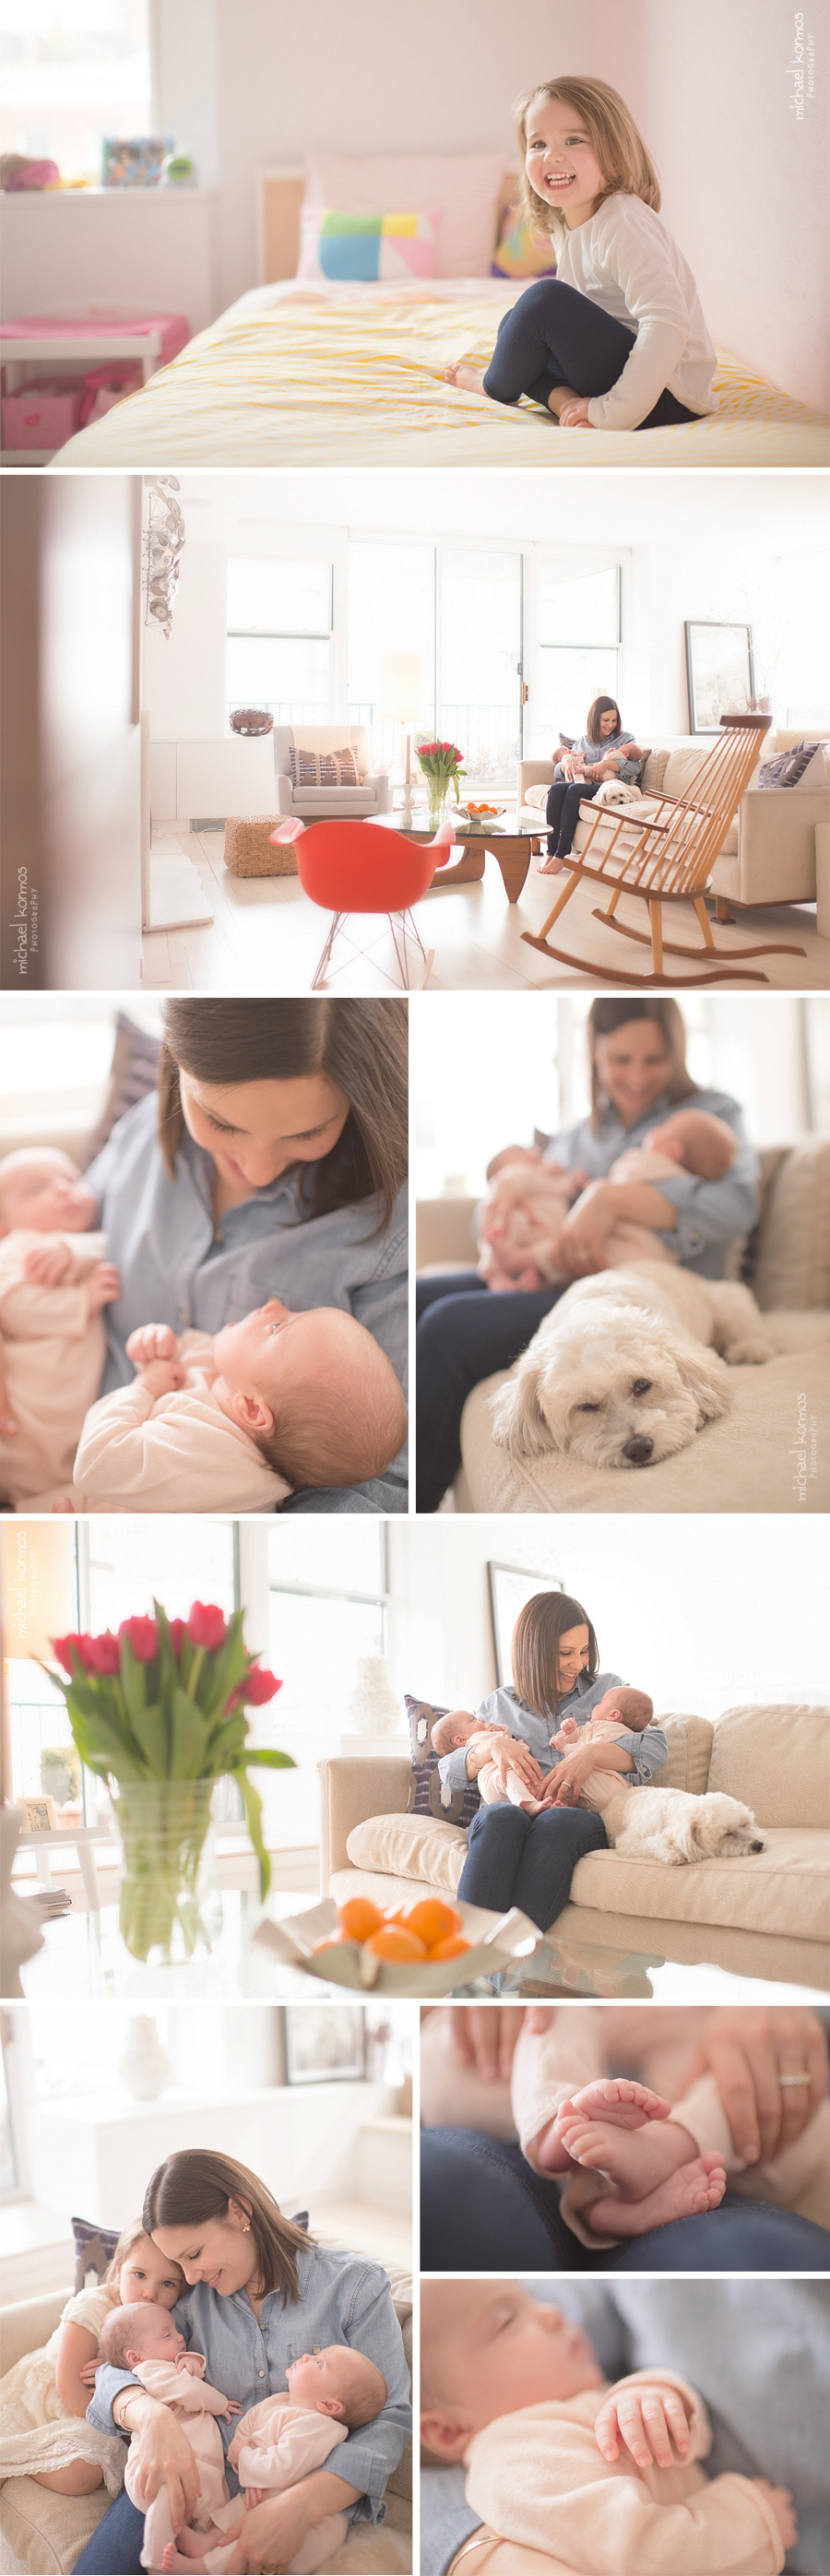 nyc lifestyle family photographer captures the happiness and pure joy of brand new babies in the home